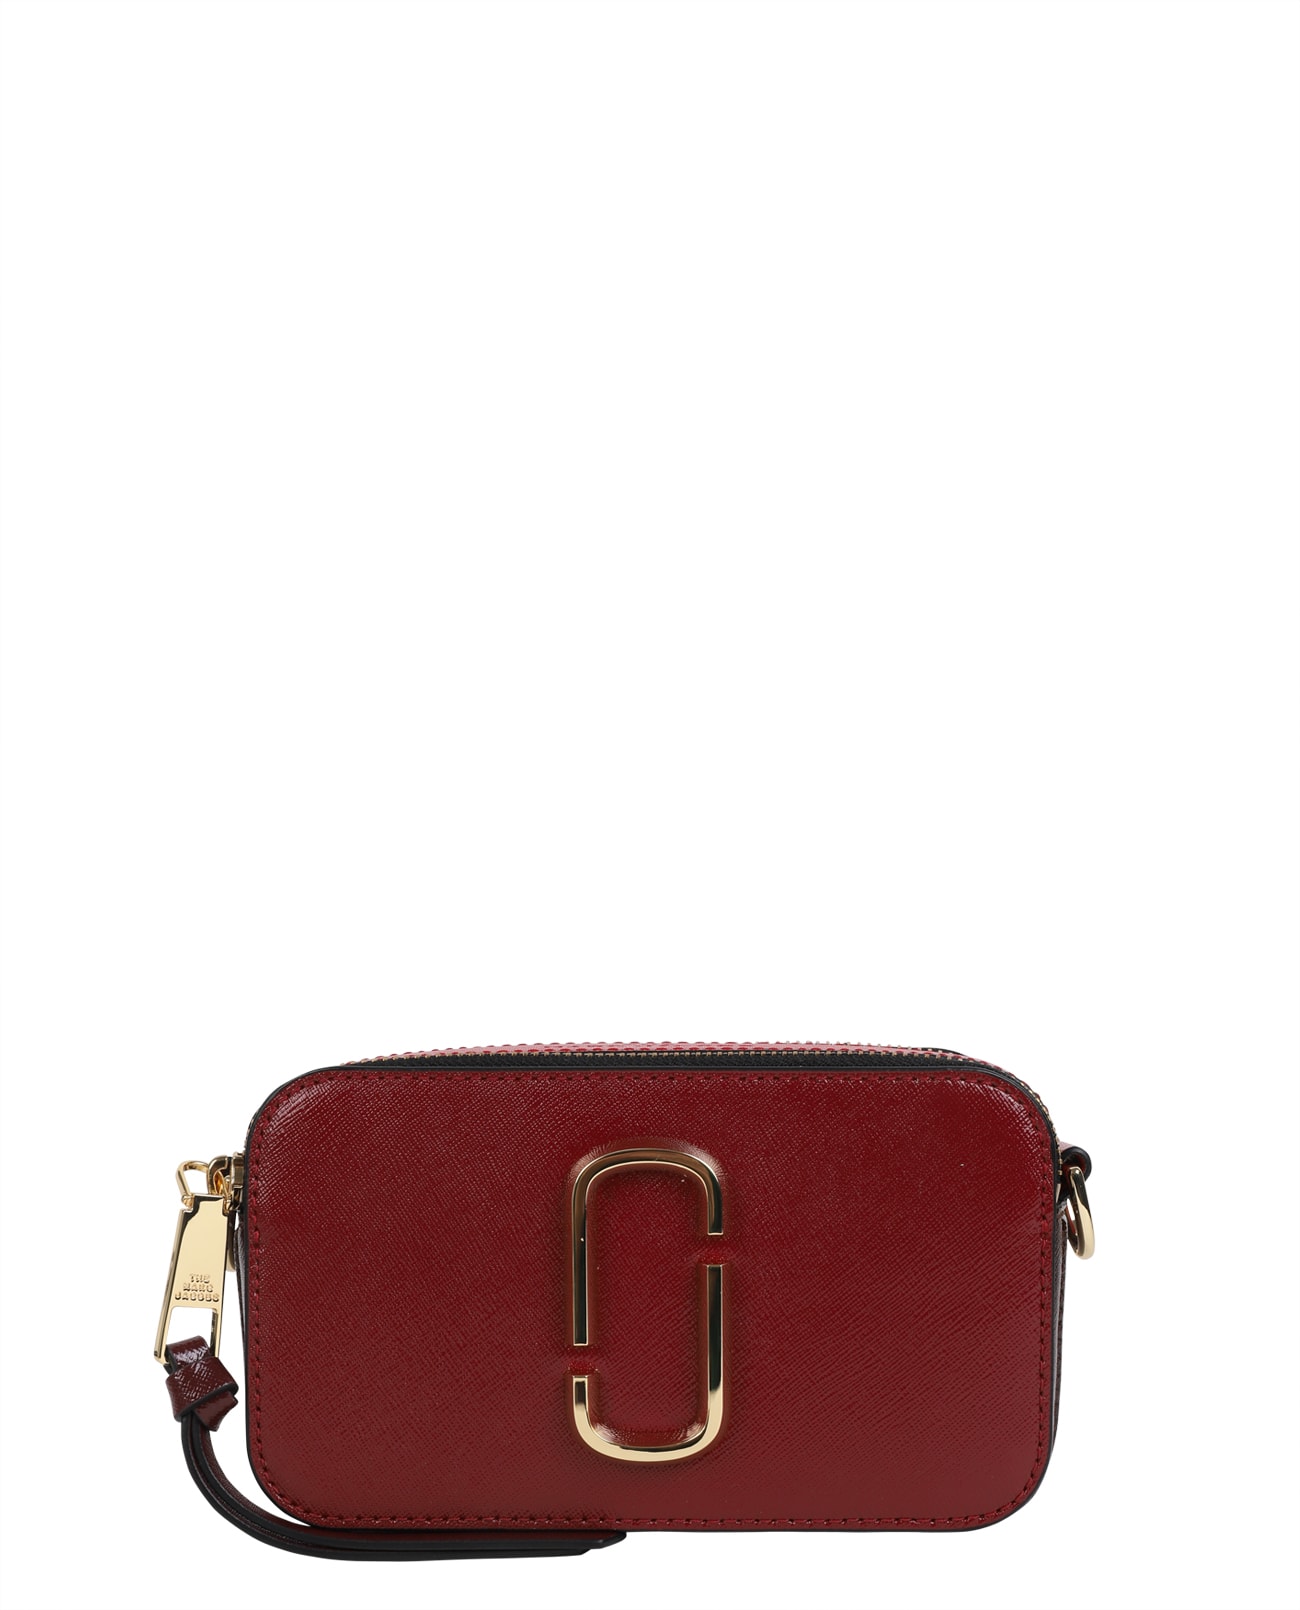 MARC JACOBS RED SNAPSHOT,11296483